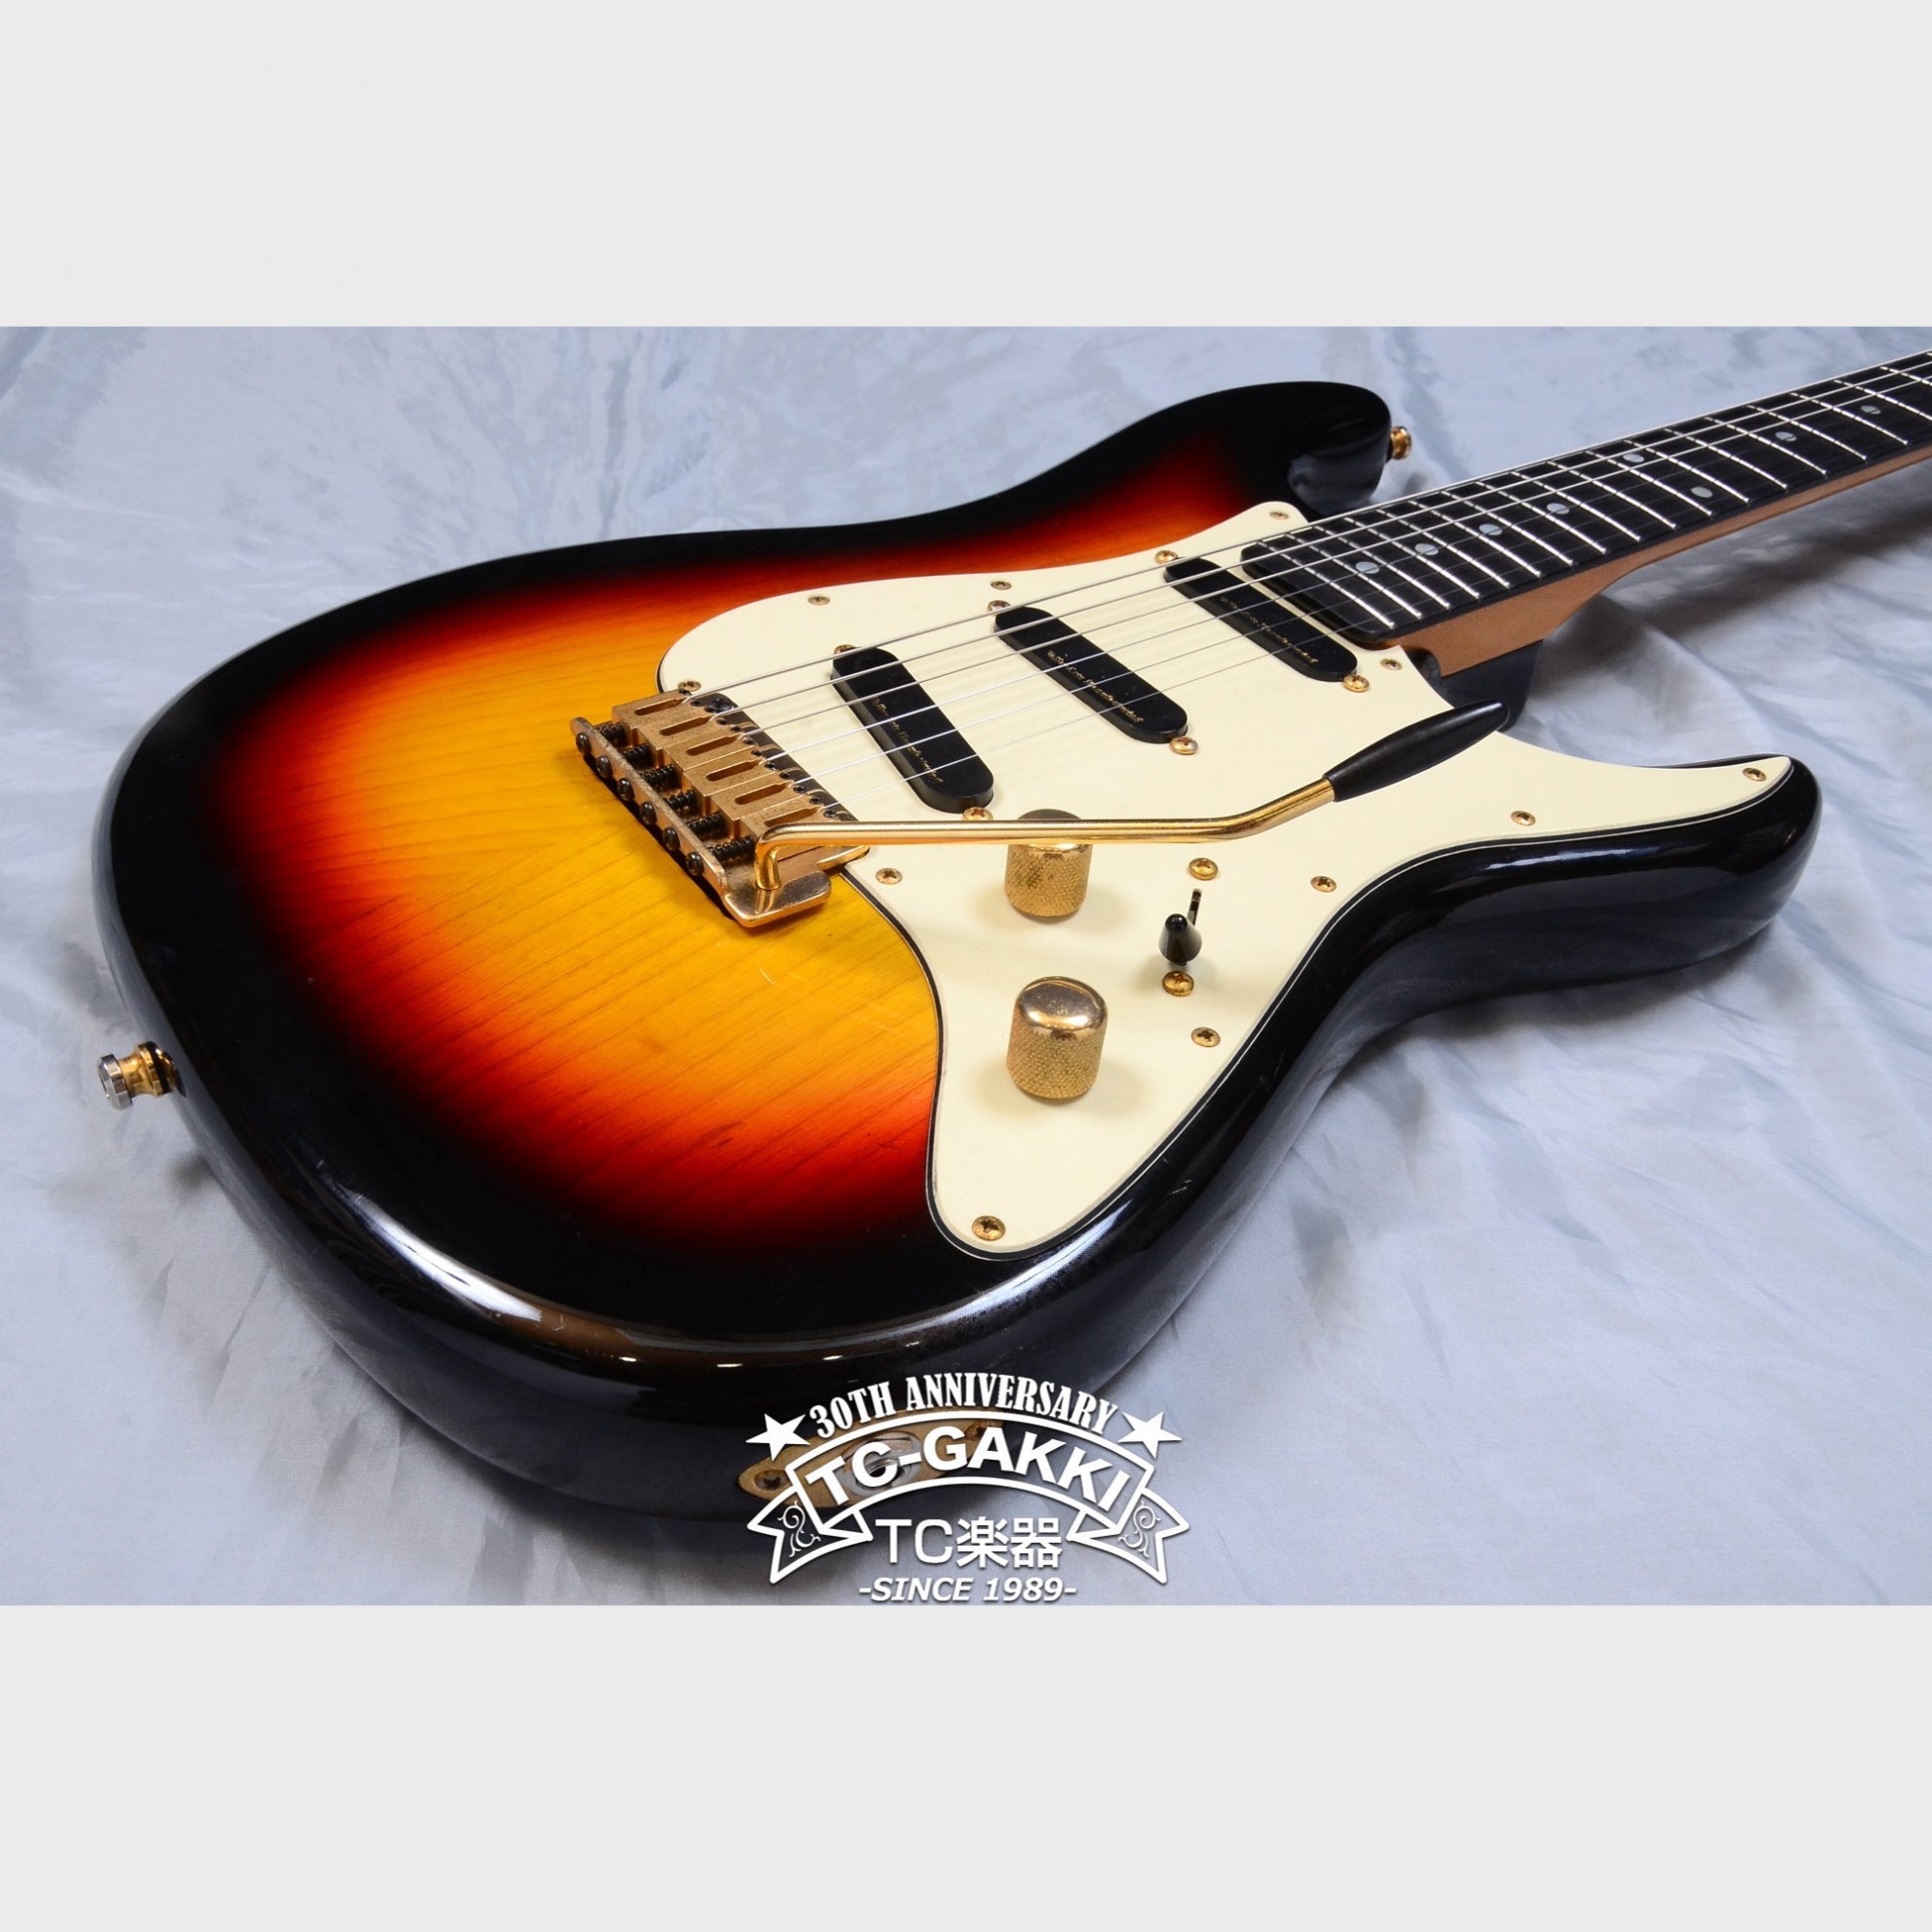 Valley Arts M Series T/7 3S/VS 1990 0 Guitar For Sale TCGAKKI